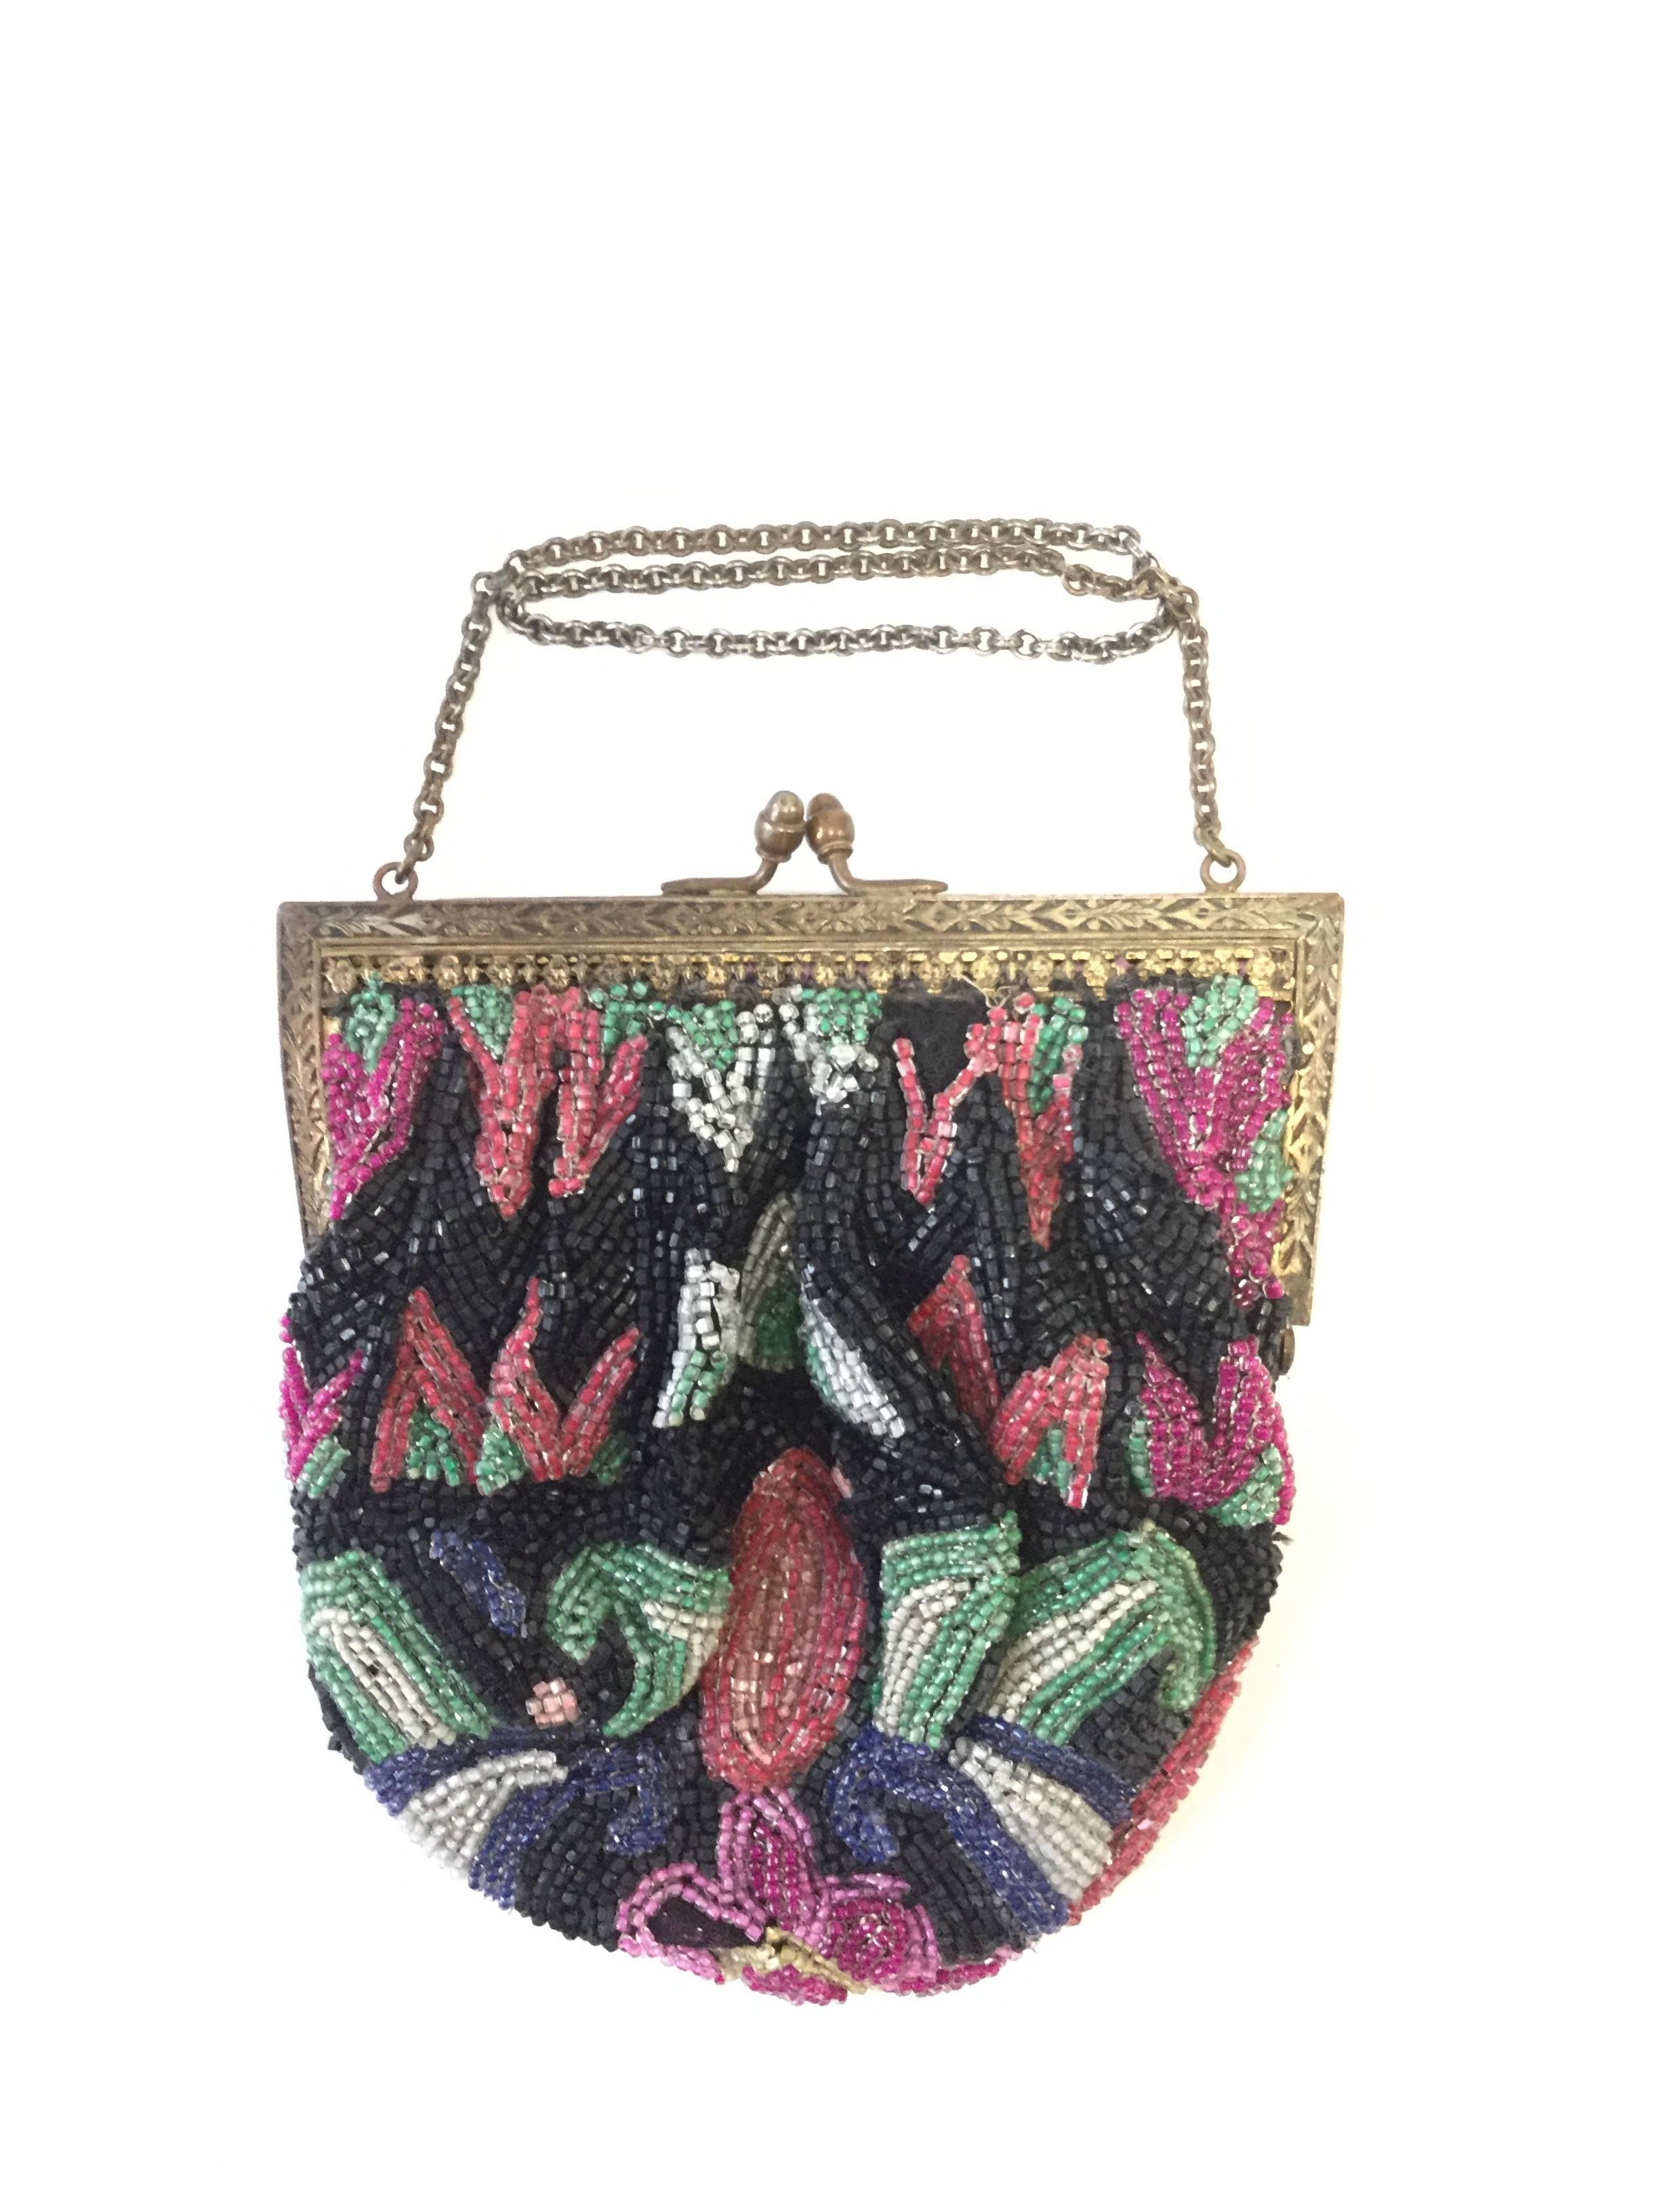 
Gorgeous fully beaded antique purse. This purse features a gorgeous radial floral design stemming from the bottom center of the piece. The design is composed of a bright and colorful pink flower with yellow accents, surrounded by leaves and other